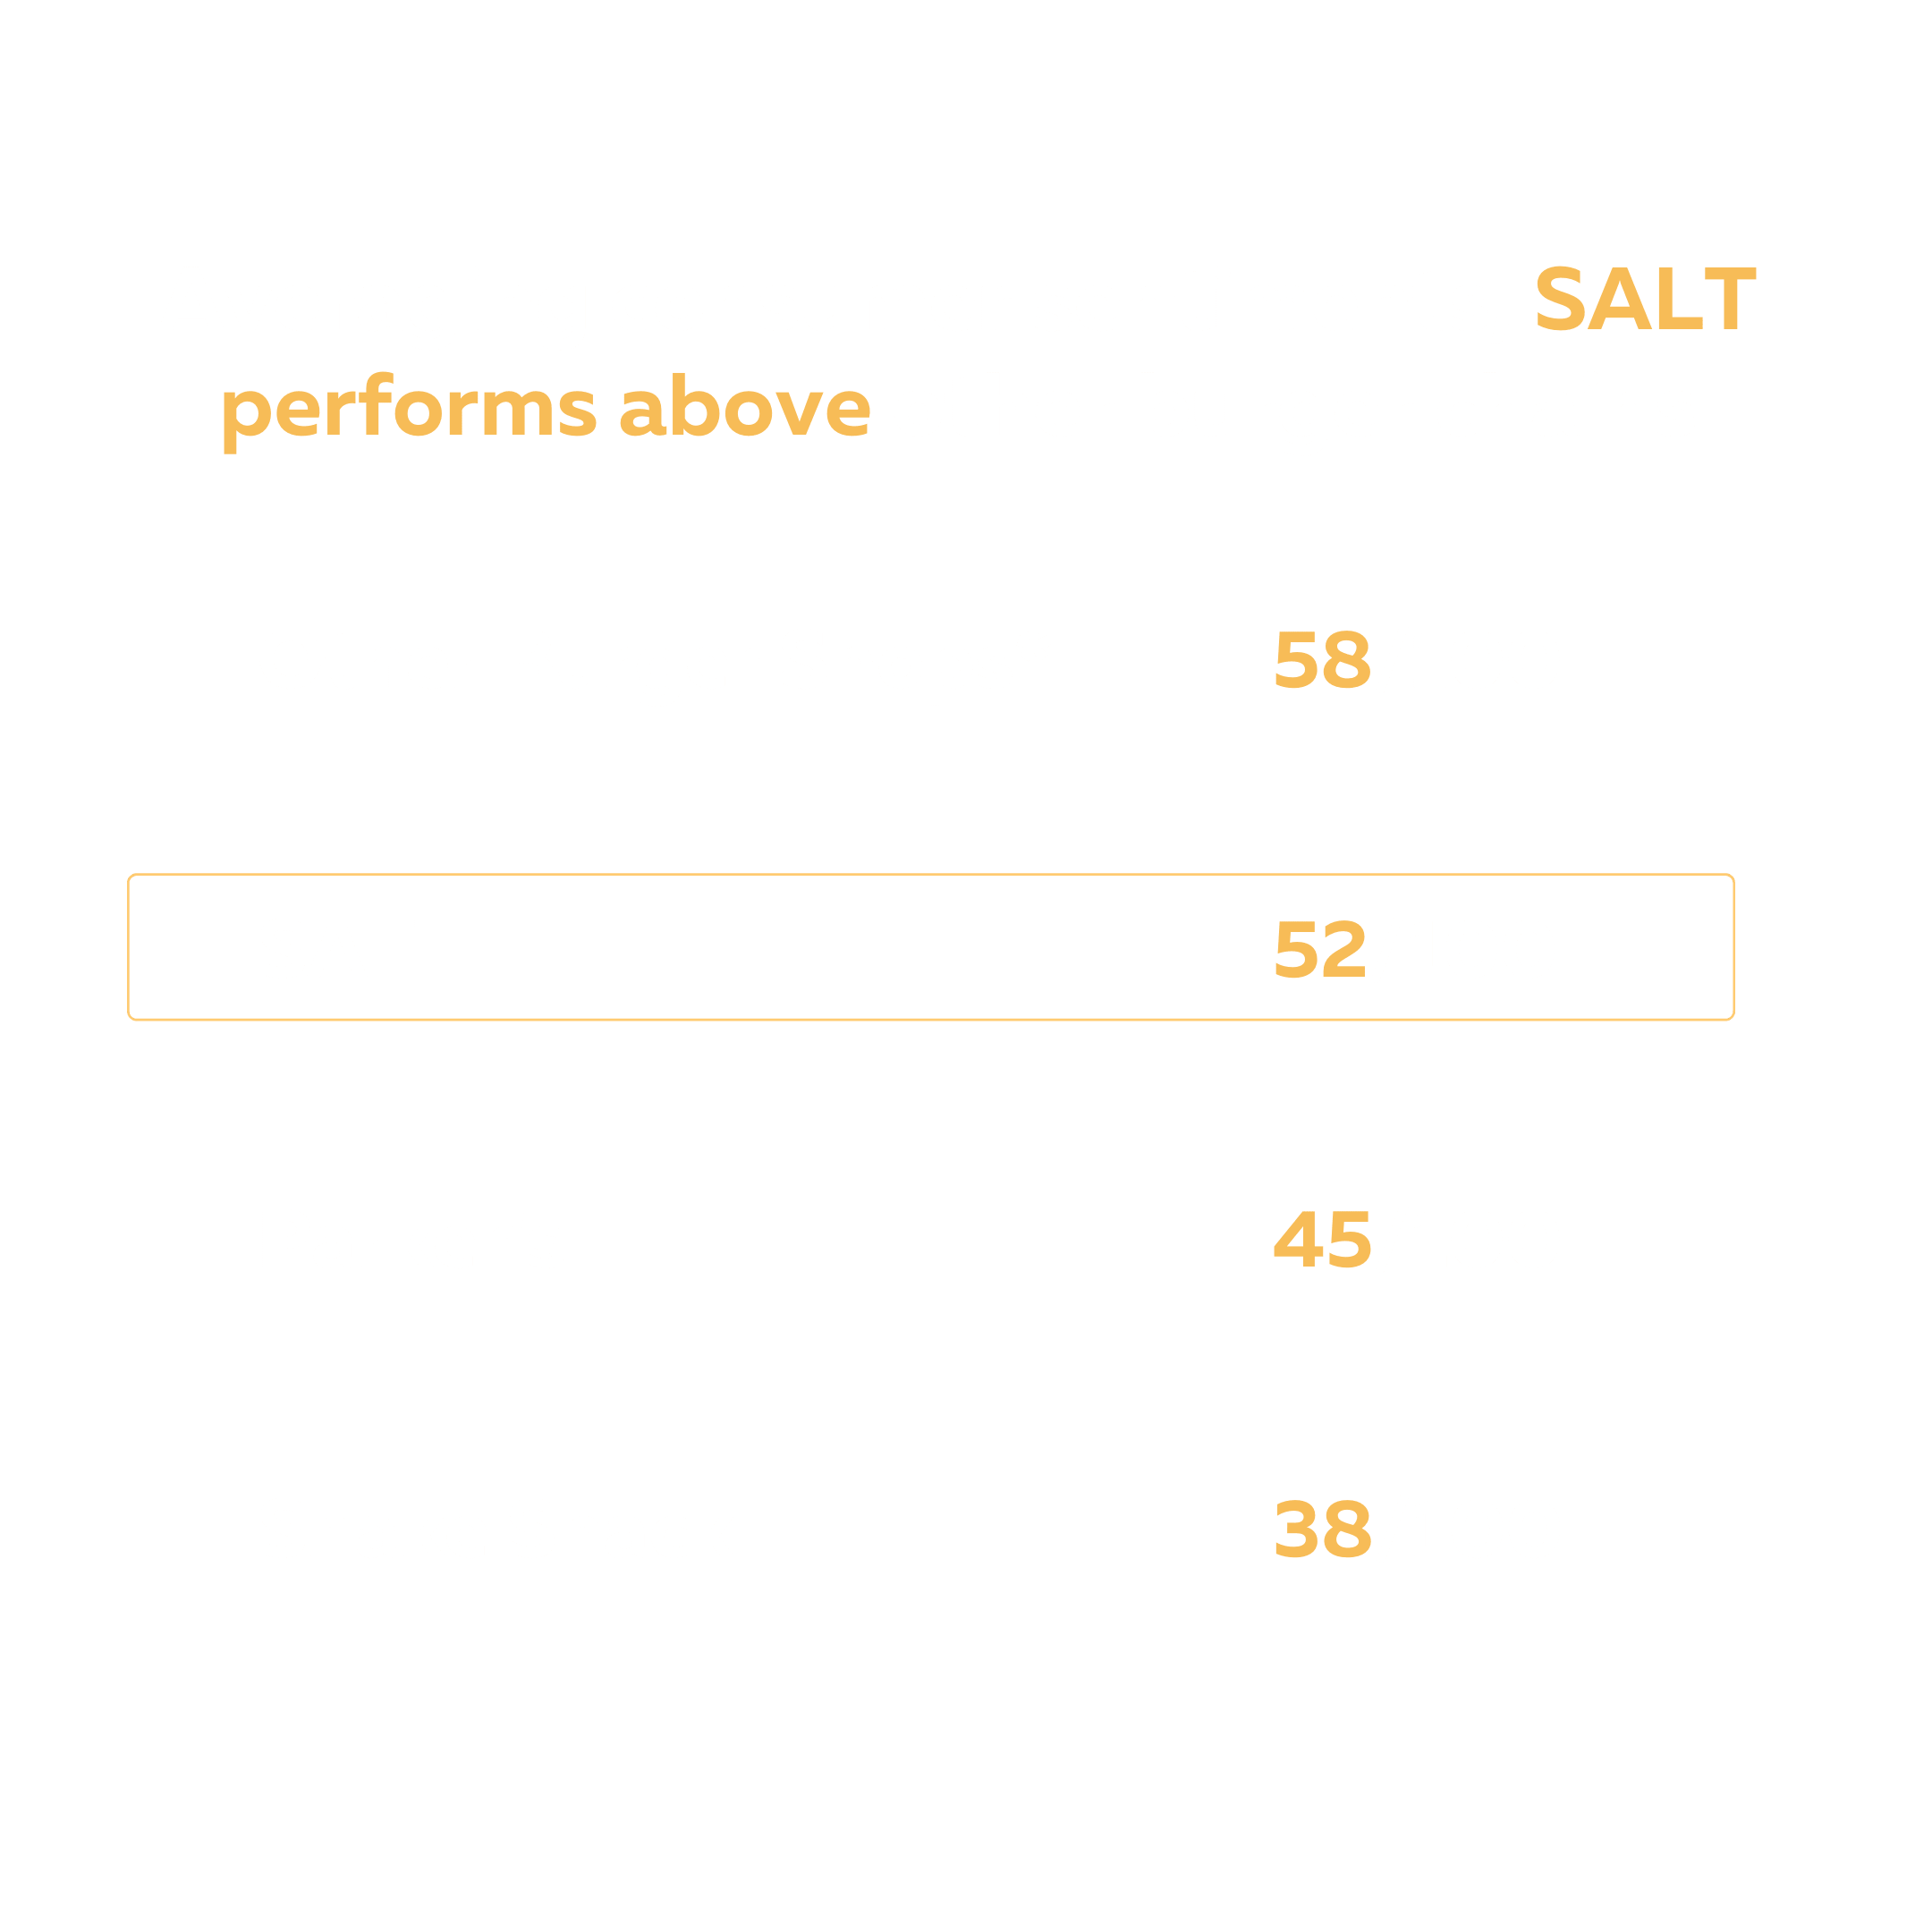 Average consumer sentiments, SALT performs above other burger chains